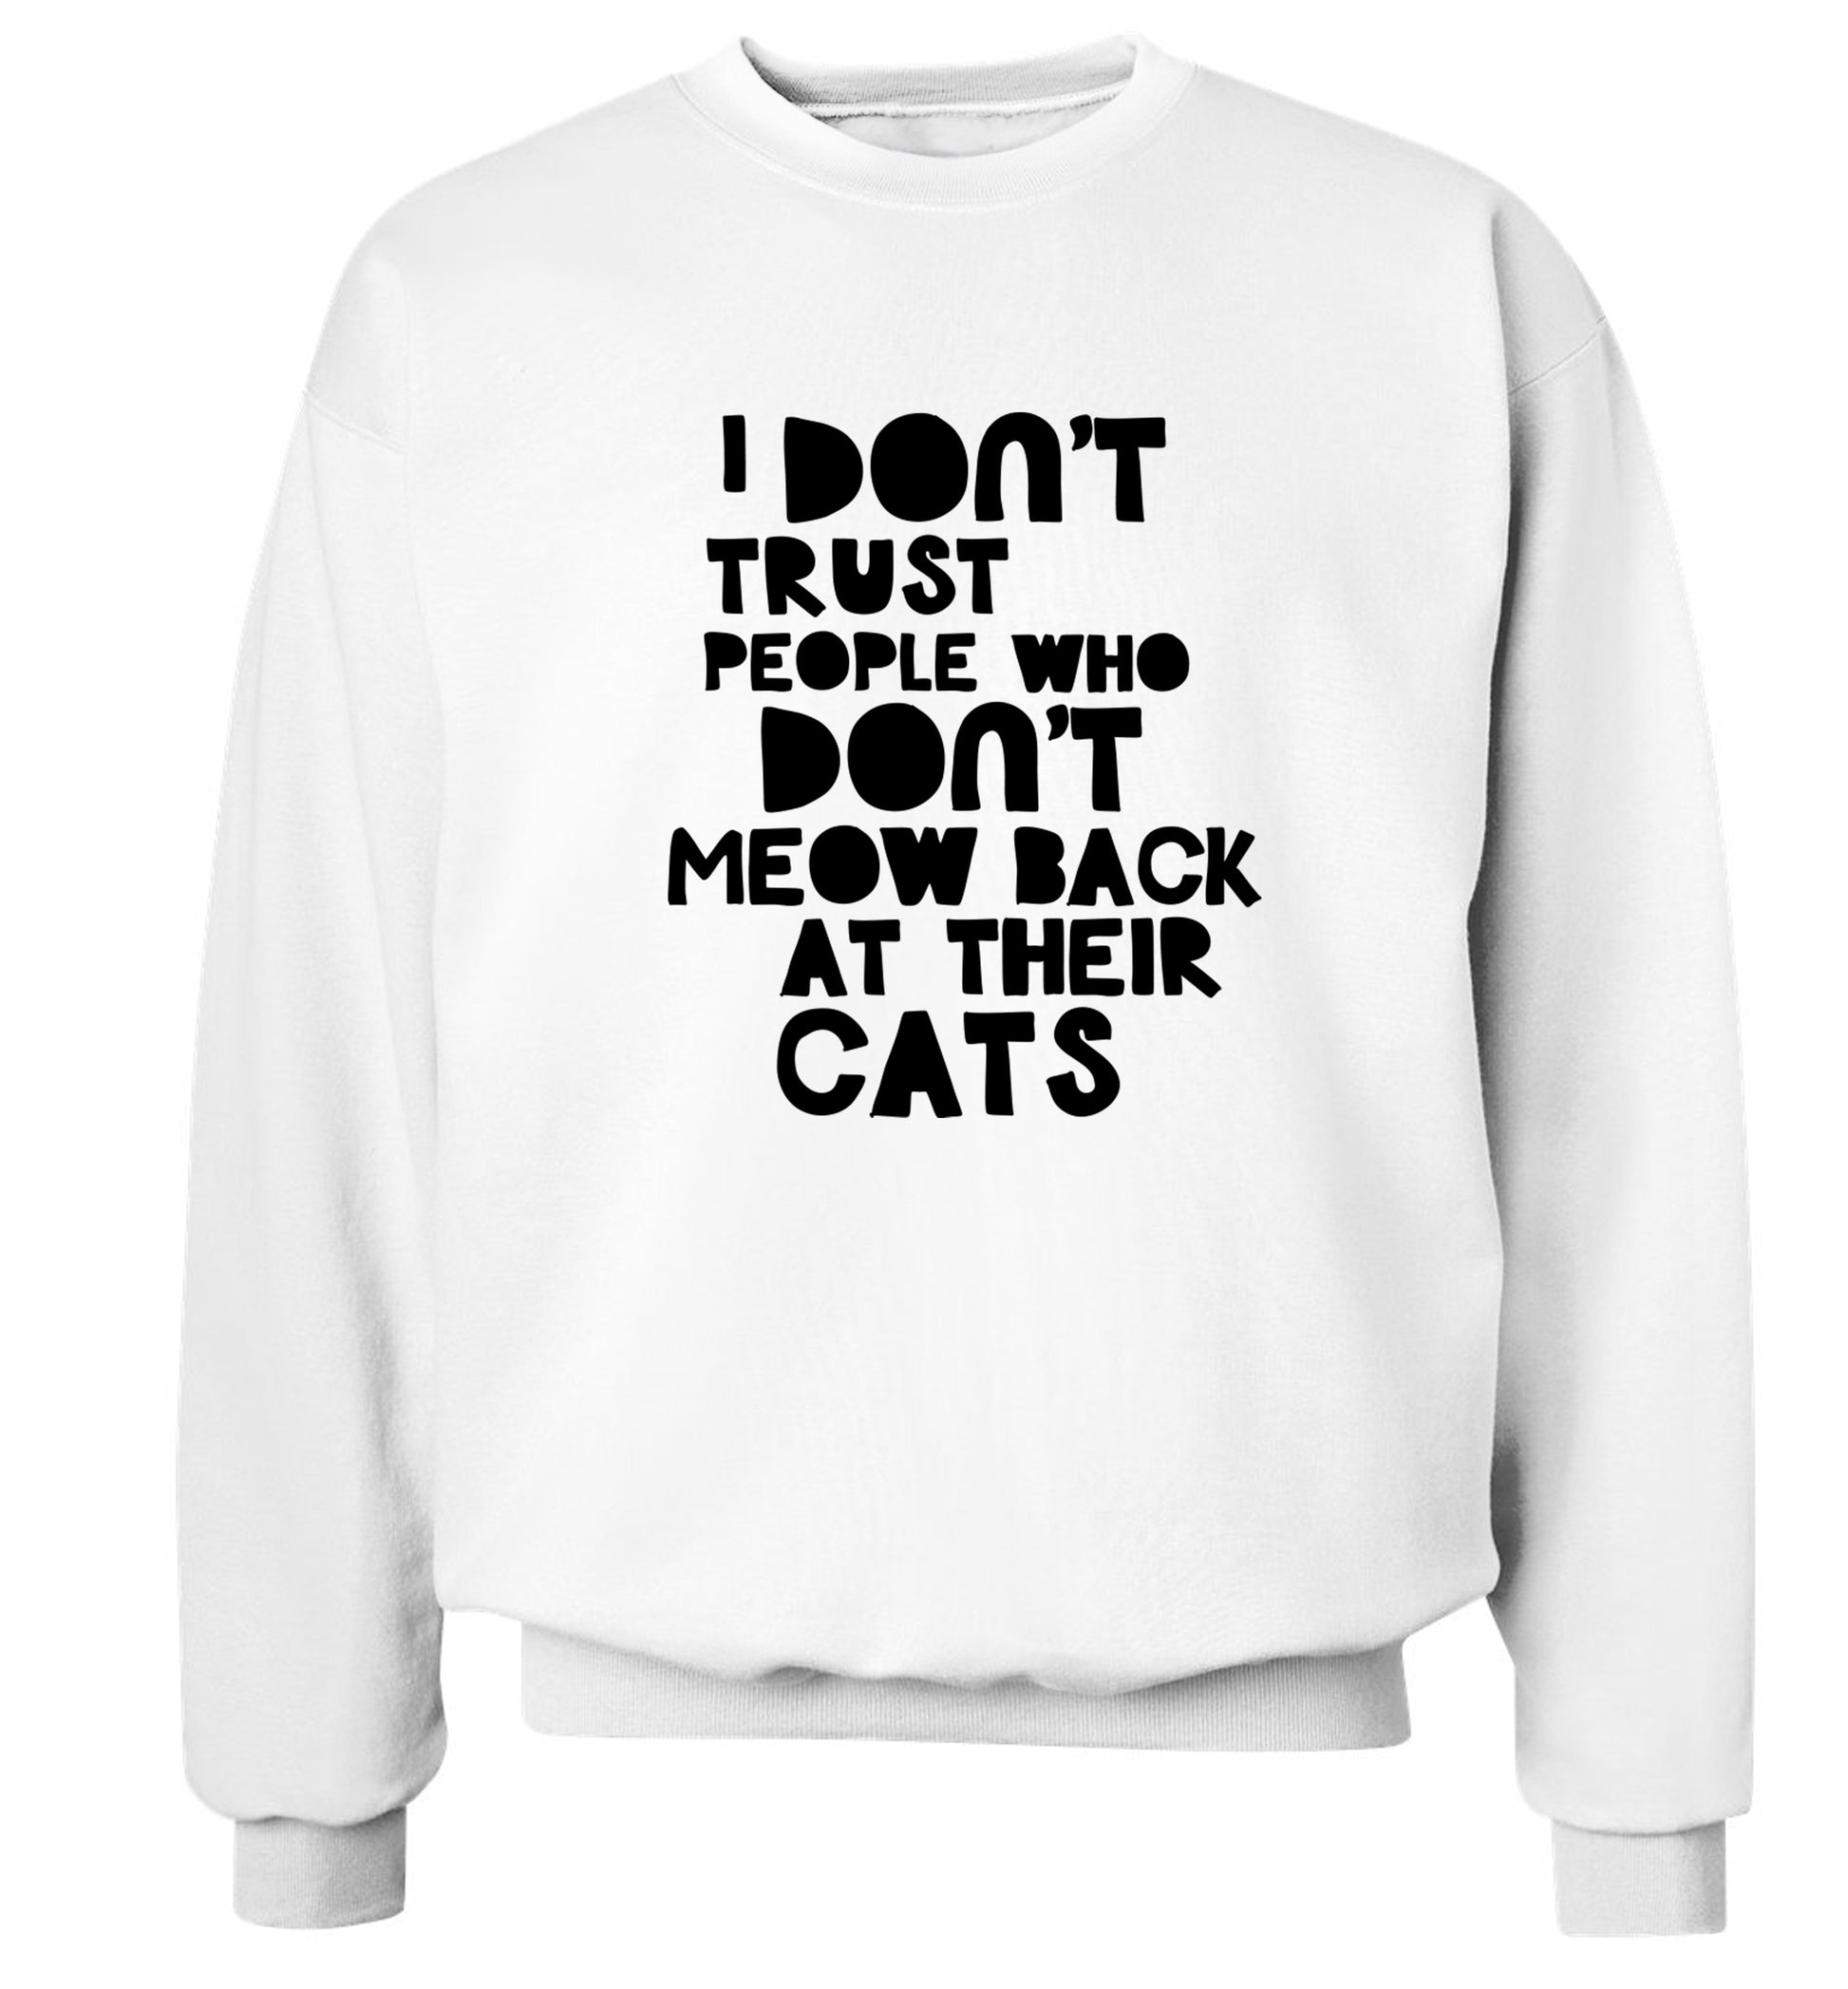 I don't trust people who don't meow back at their cats Adult's unisex white Sweater 2XL